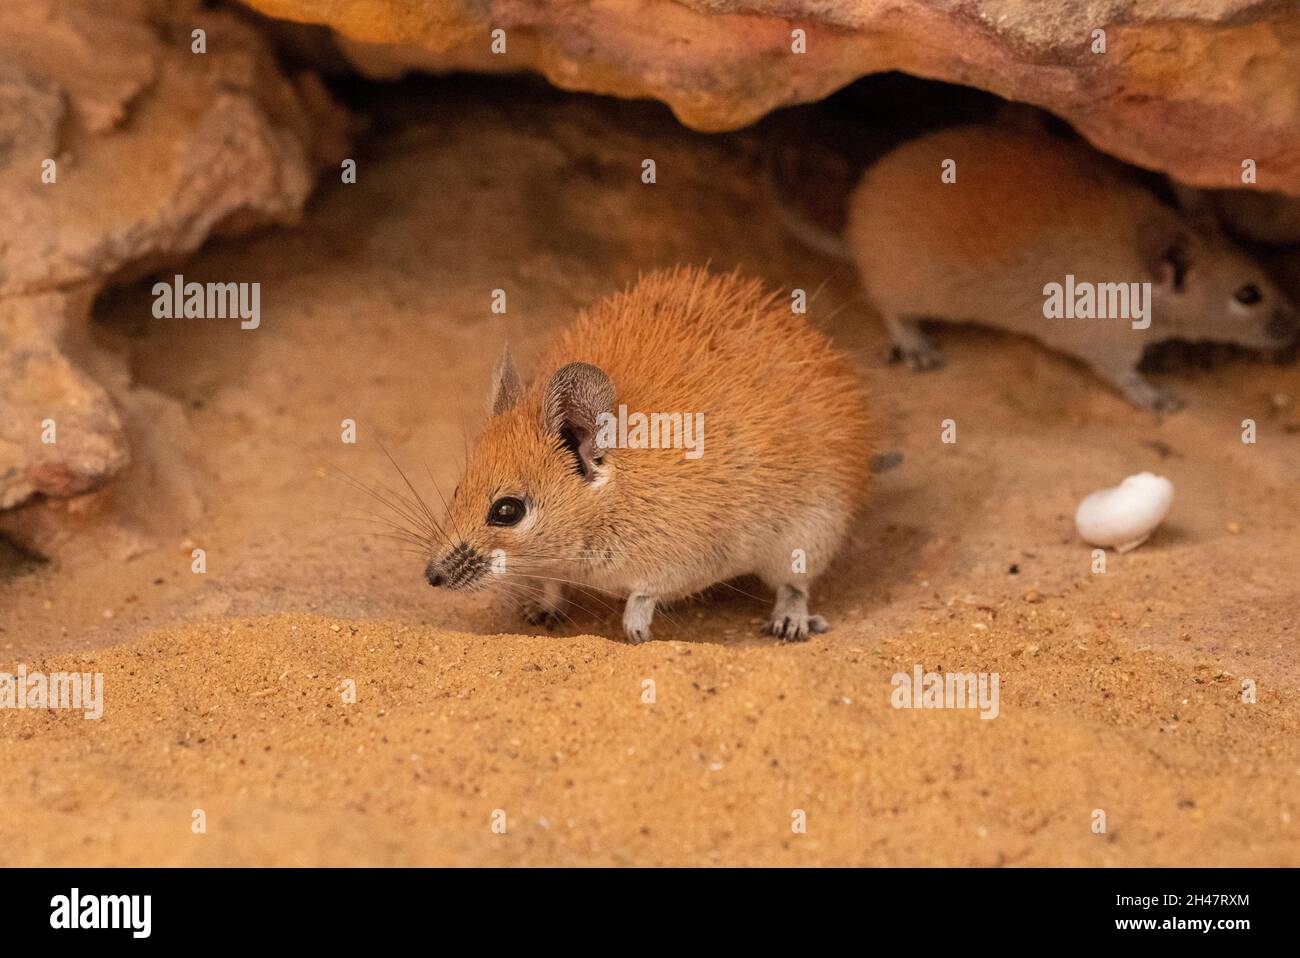 Golden Spiny Mouse (Acomys russatus)  It is omnivorous and feeds on seeds, desert plants, snails, and insects. Living in desert regions, it is a xeric Stock Photo